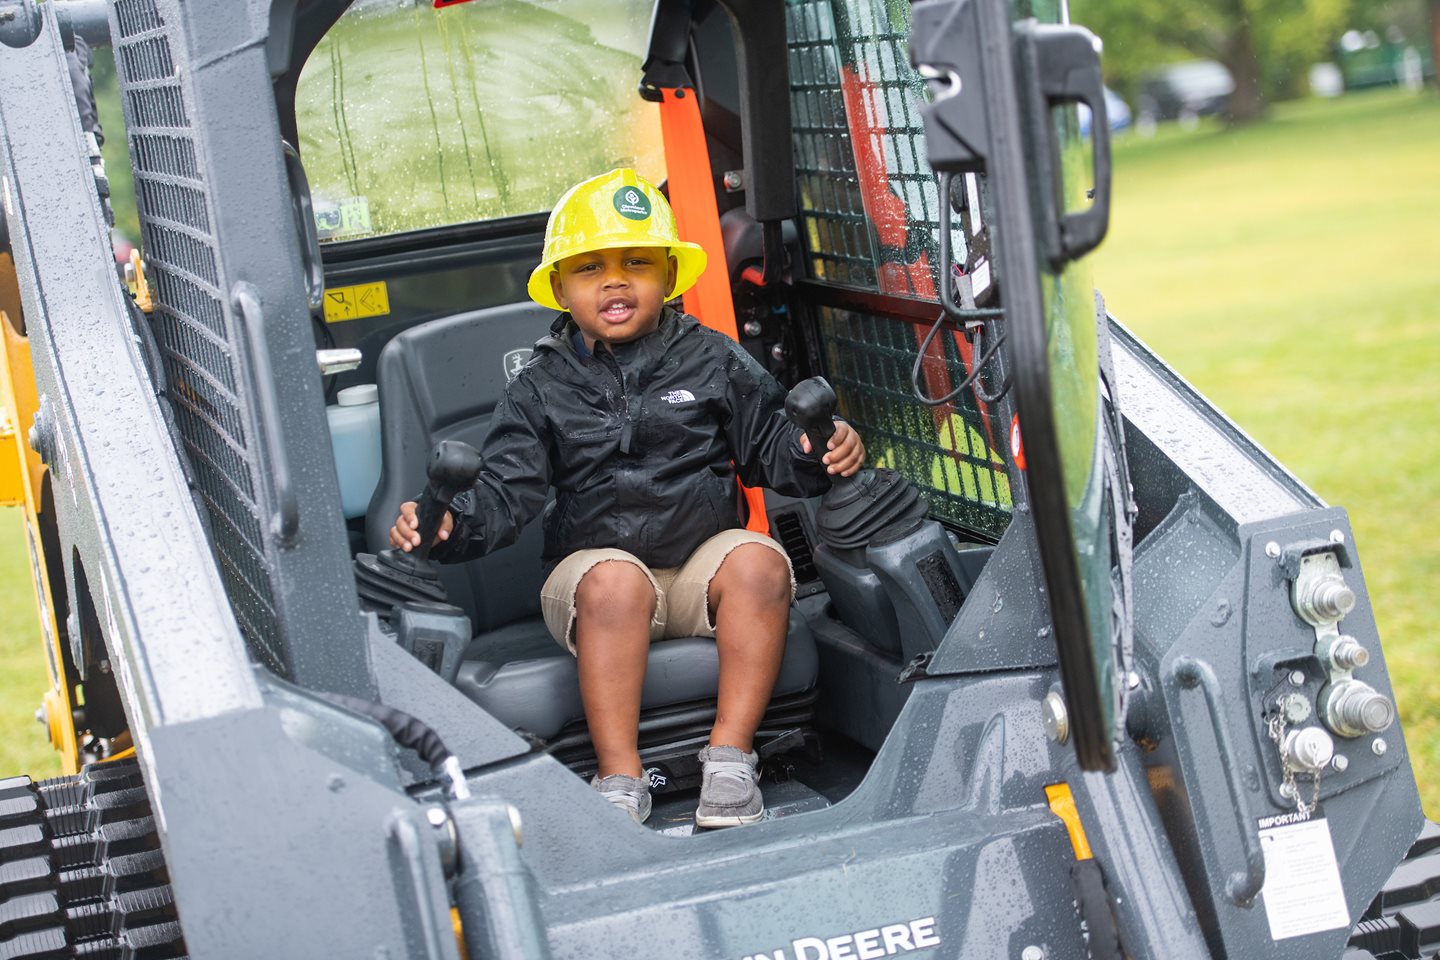 Cleveland Metroparks Announces 12th Annual Touch-a-Truck Presented by CrossCountry Mortgage